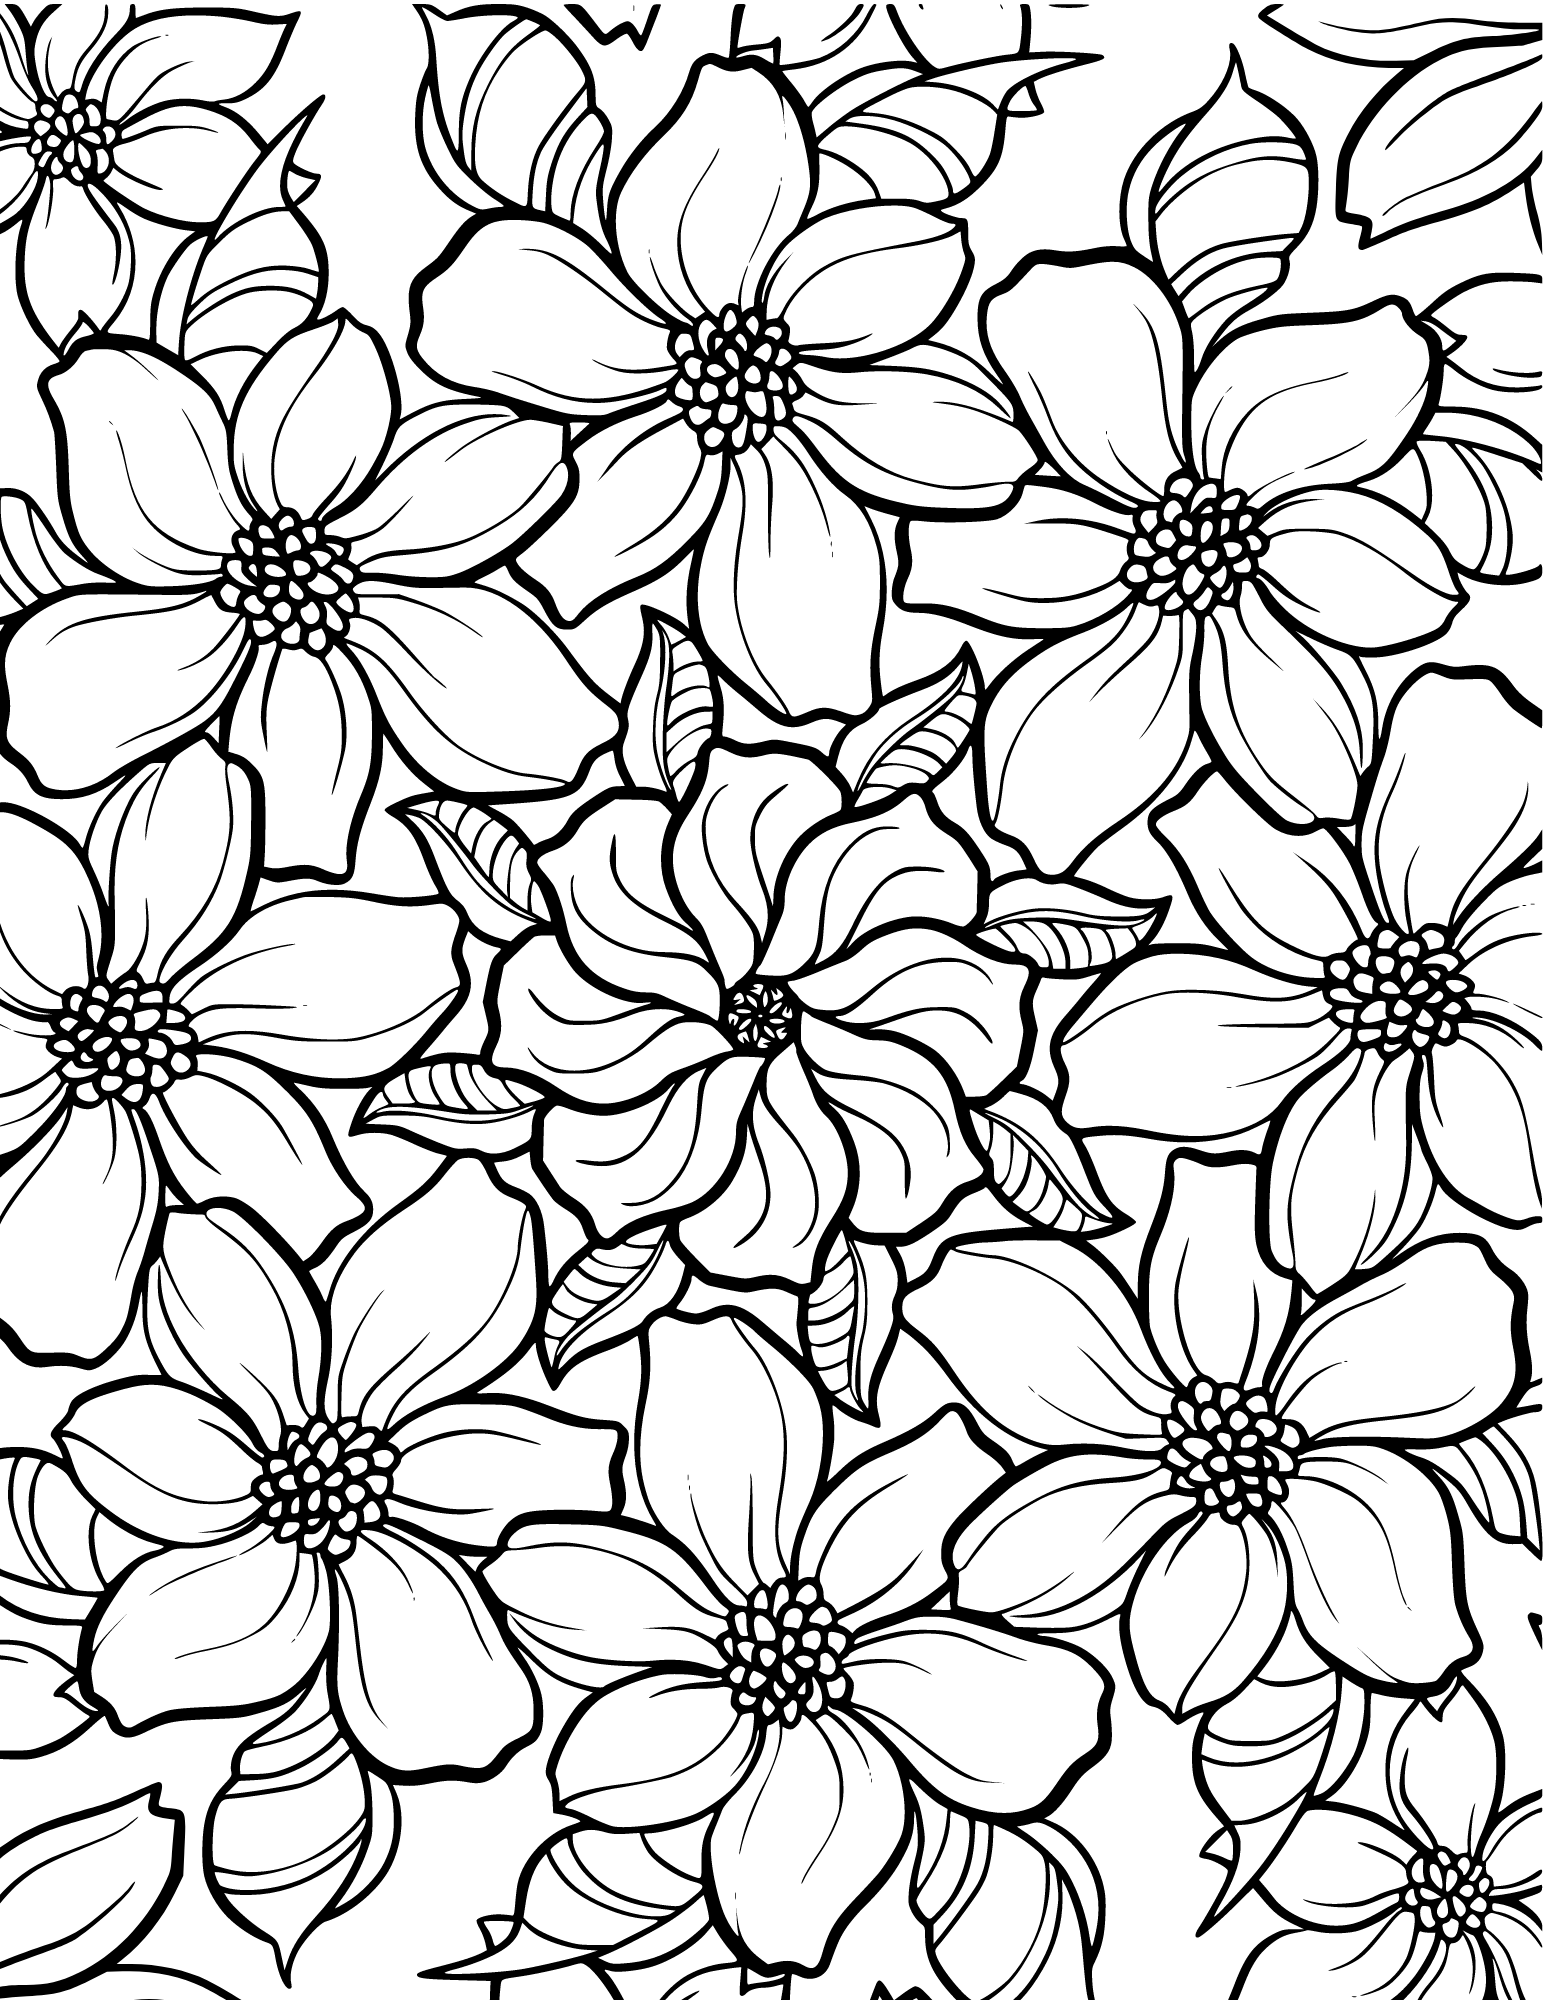 Zentangle Flowers full coloring page